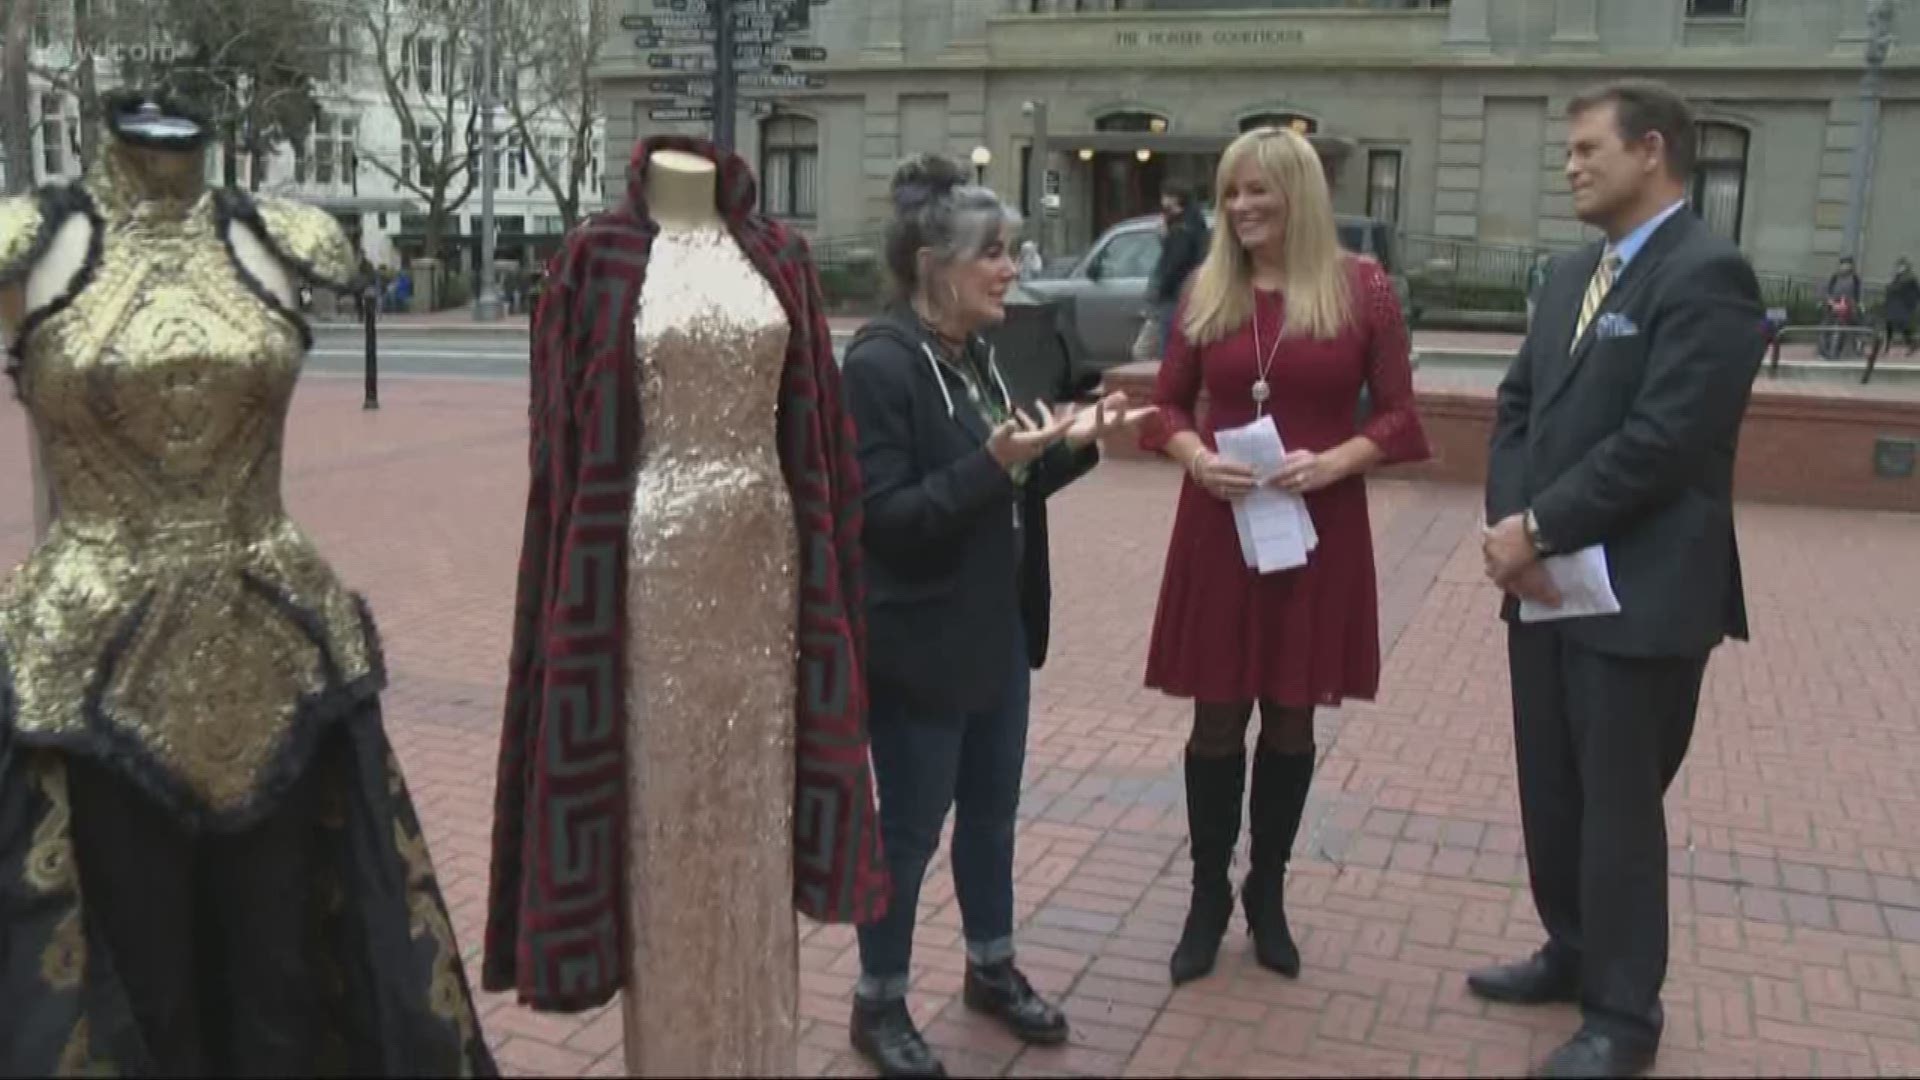 Sonia Kasparian discusses her couture at Pioneer Courthouse Square